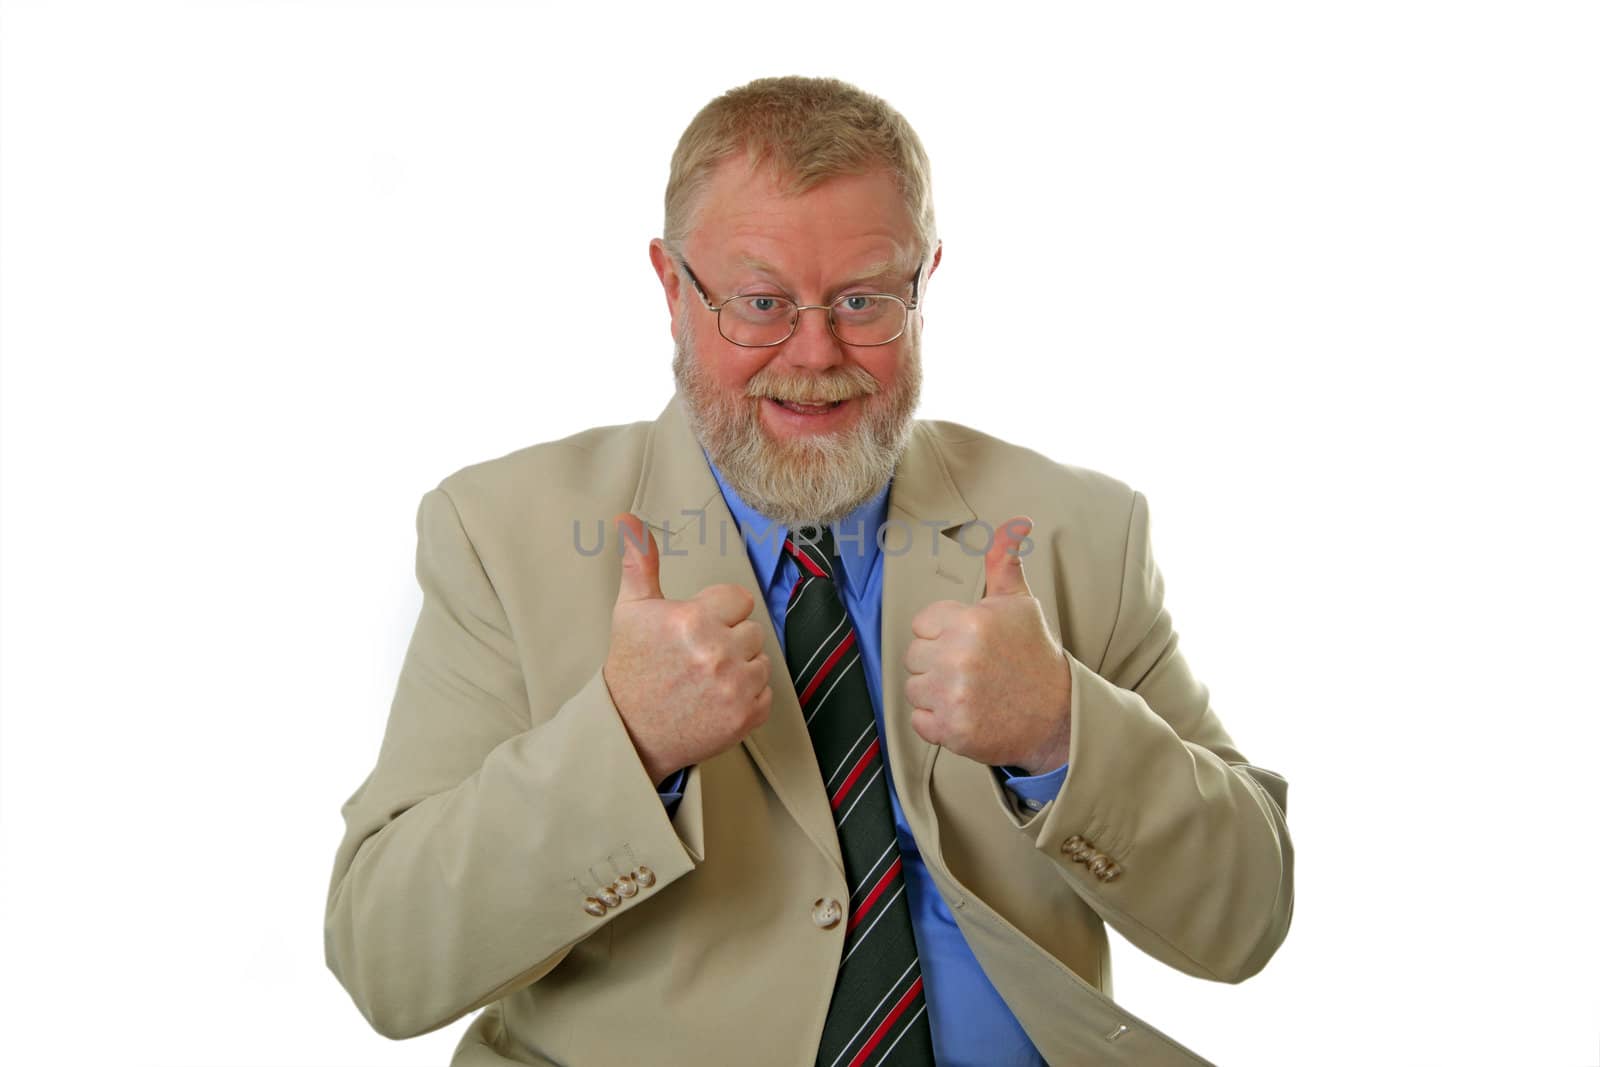 Thumbs up business man on white background